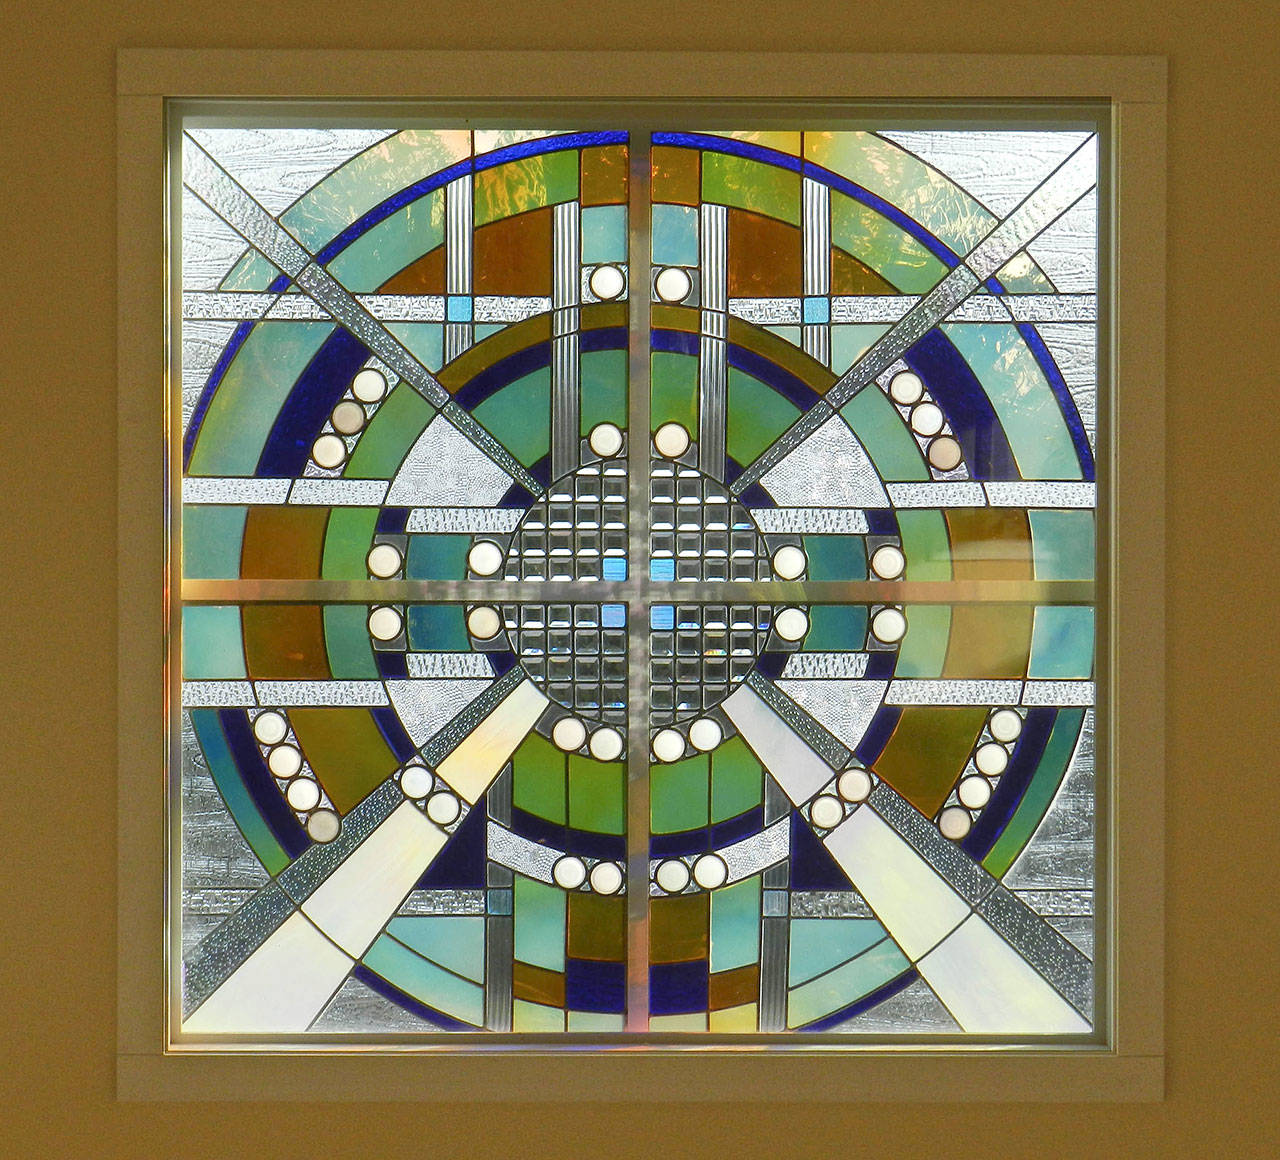 Camano Island glass artist Jack Archibald recently donated this large window to the Camano Center’s Second Chance Thrift Store. Titled “Future Cannery,” the peice used about 40 recycled canning jar lids. Archibald’s work, much of it donated, can be viewed at the fire stations on Camano and many other places in north Snohomish County.